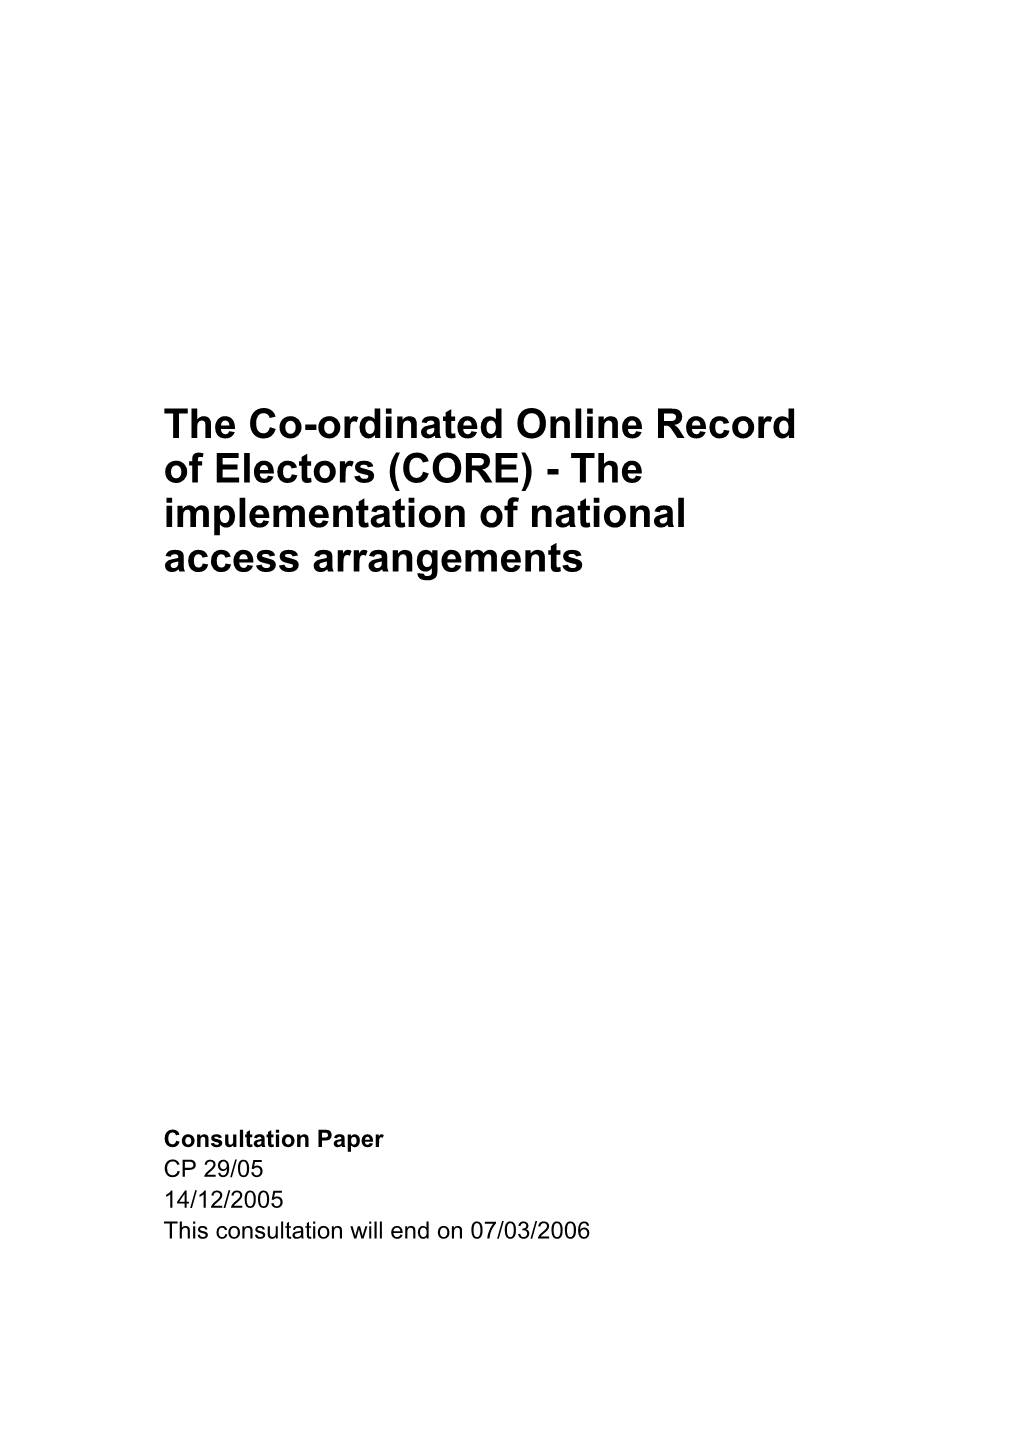 The Co-Ordinated Online Record of Electors (CORE) - the Implementation of National Access Arrangements